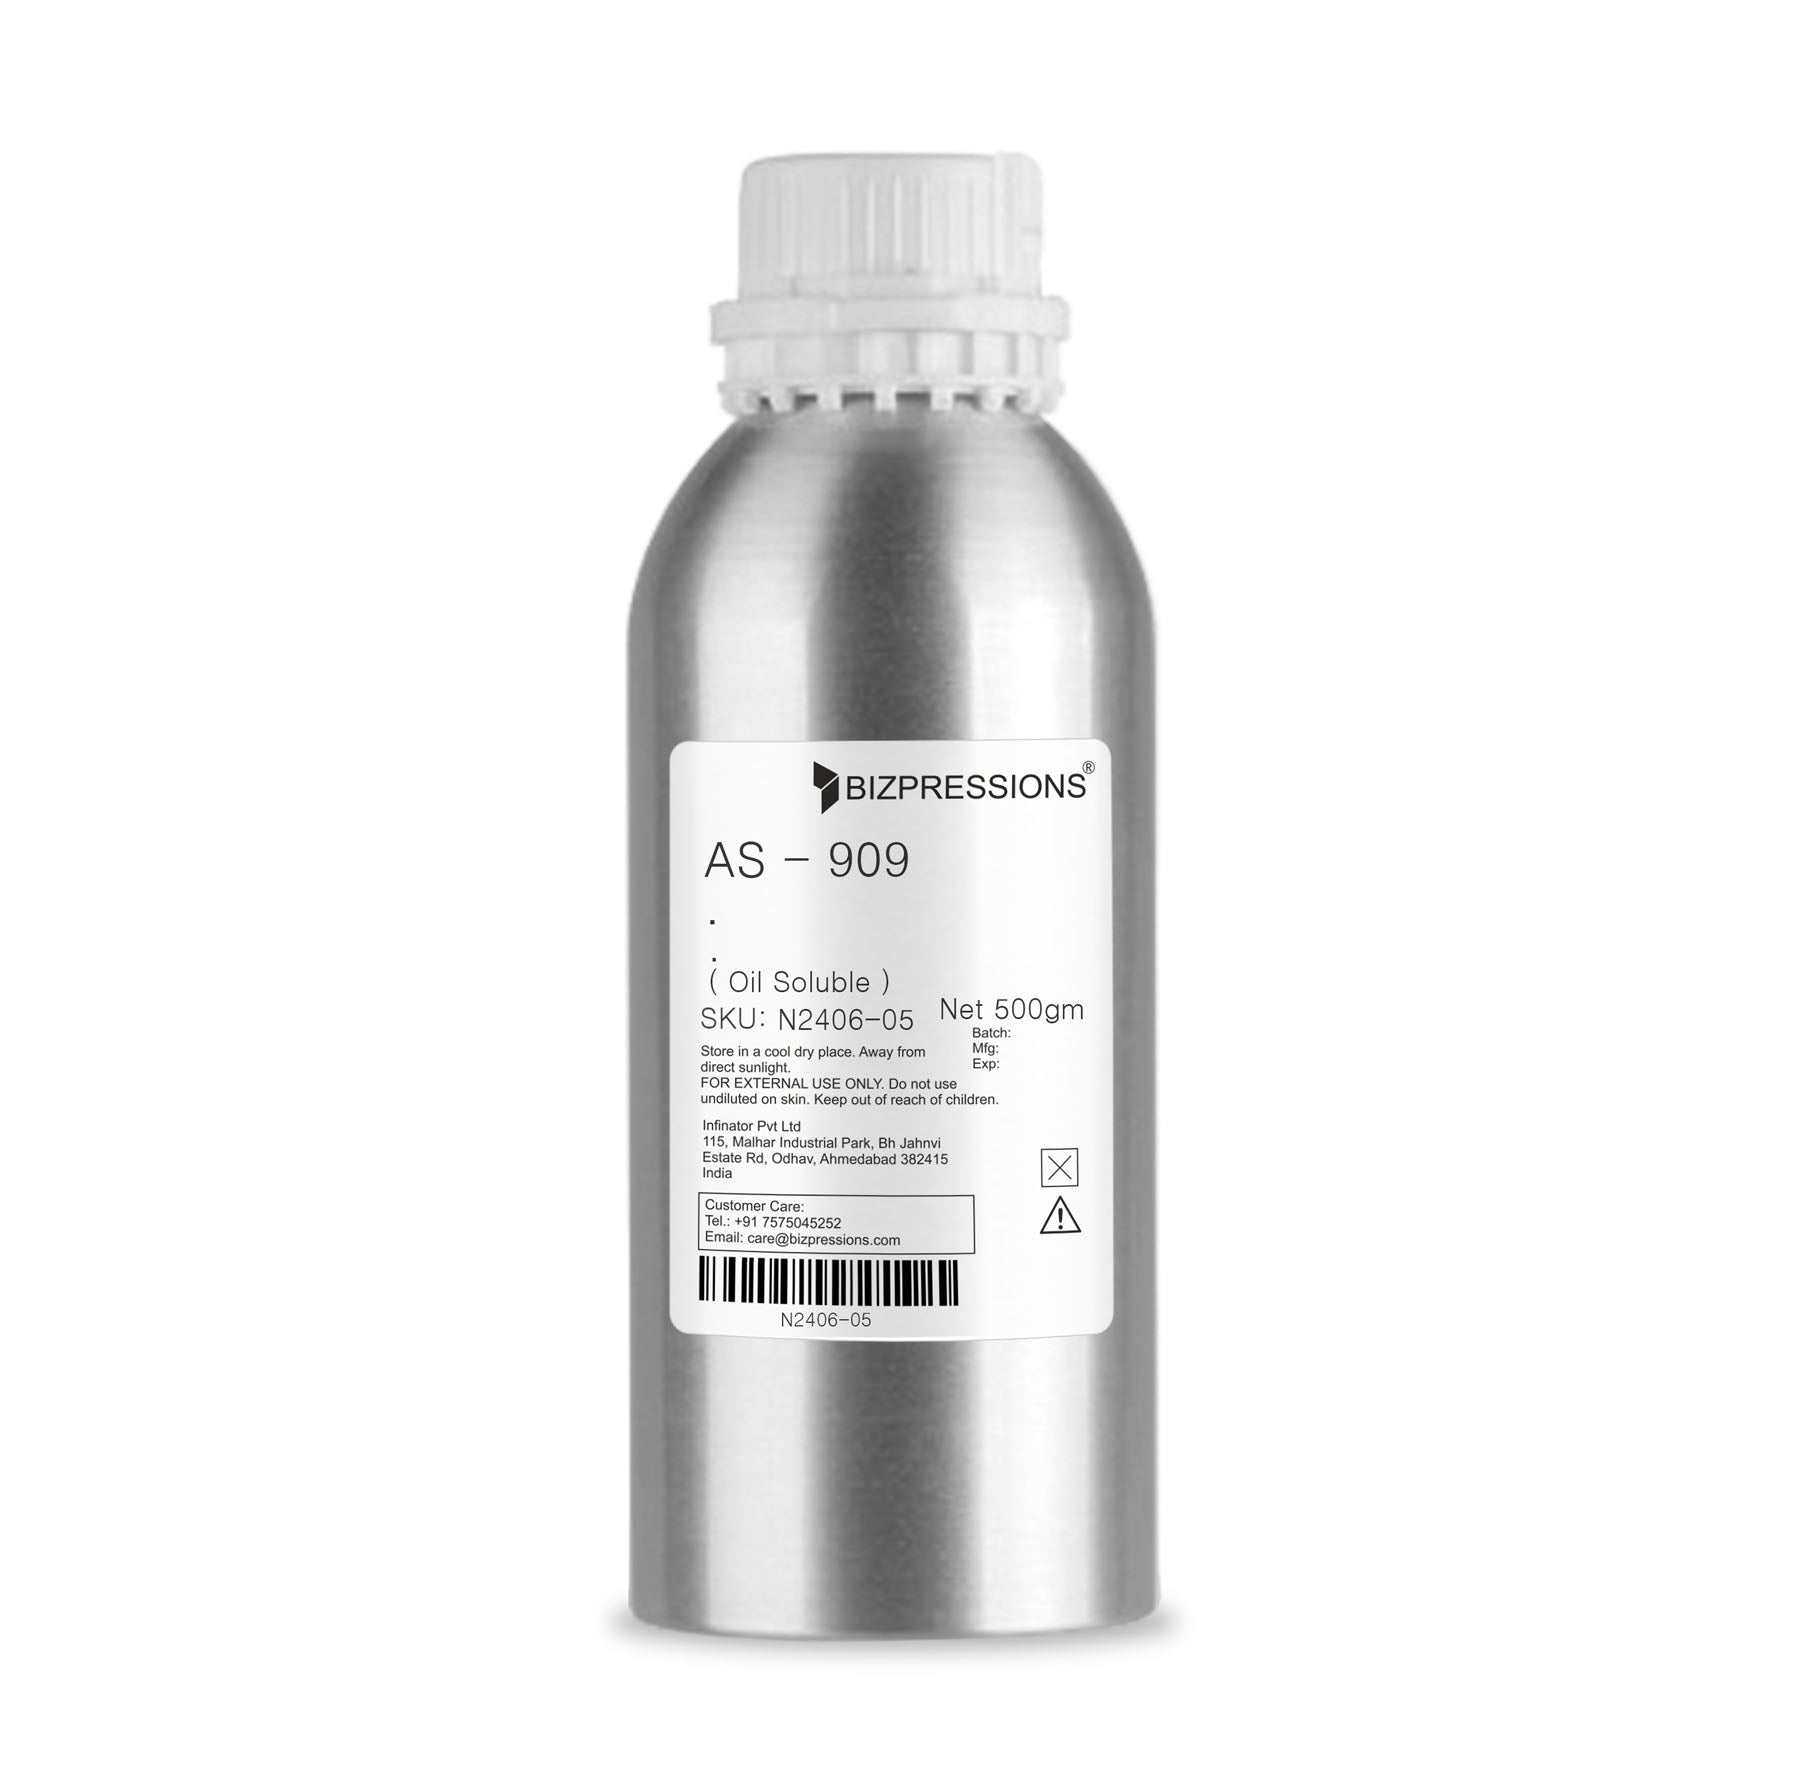 AS - 909 - Fragrance ( Oil Soluble ) - 500 gm